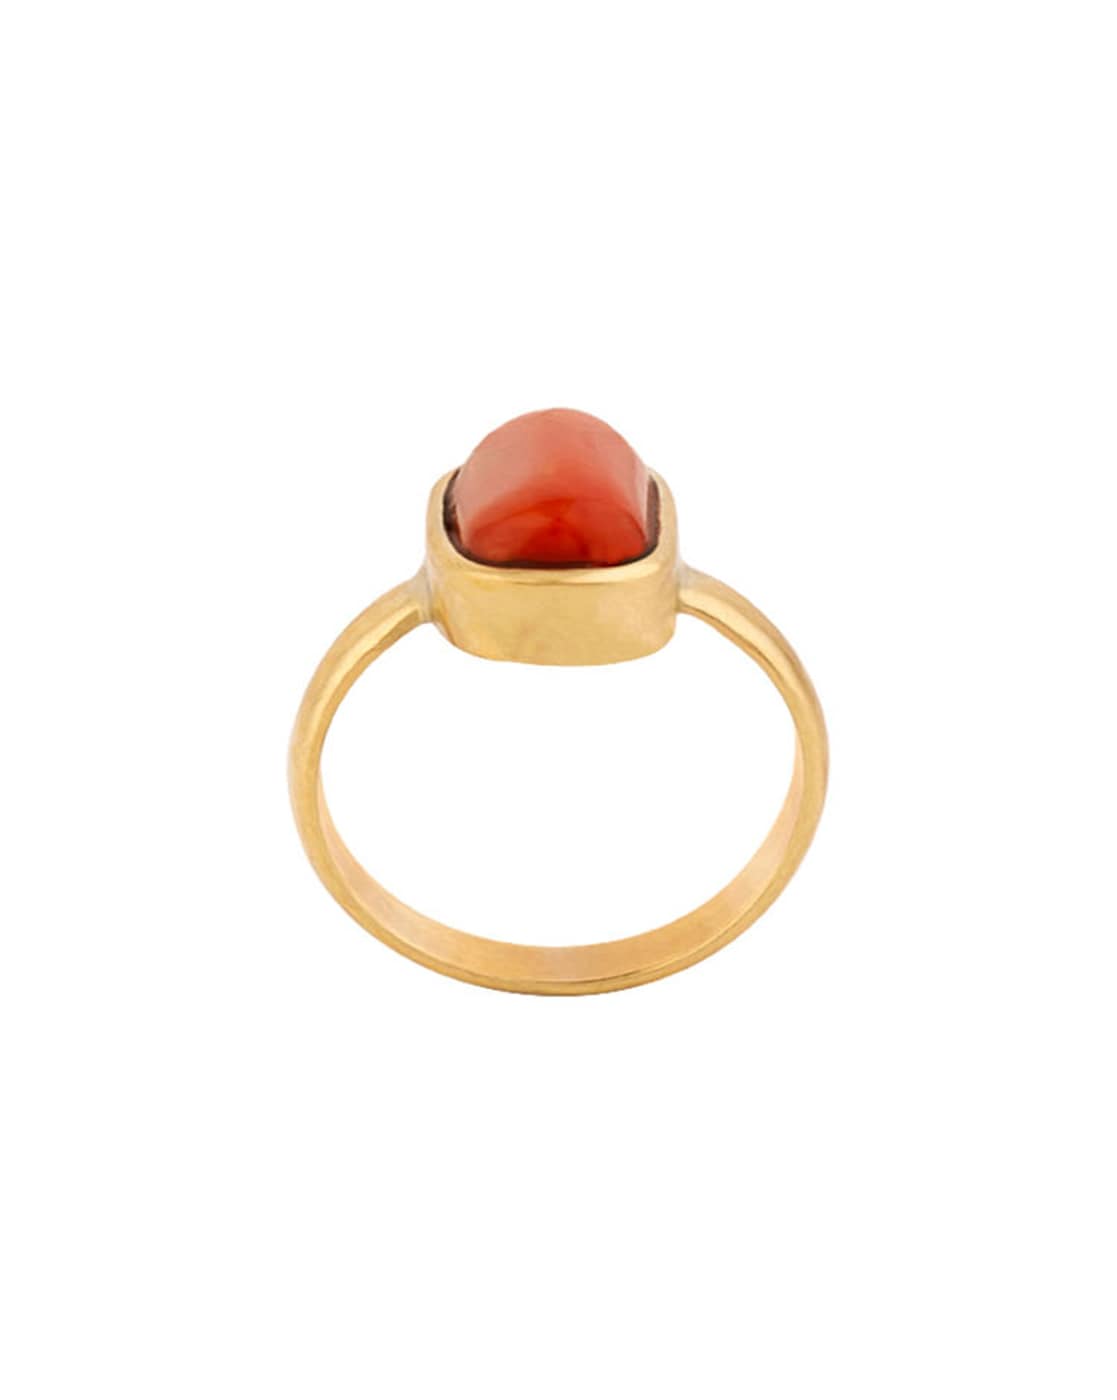 Unique 18K Gold Vermeil Red Coral Gemstone Oval Shape Stackabale Ring -  Jewelry Women Accessories | World Art Community